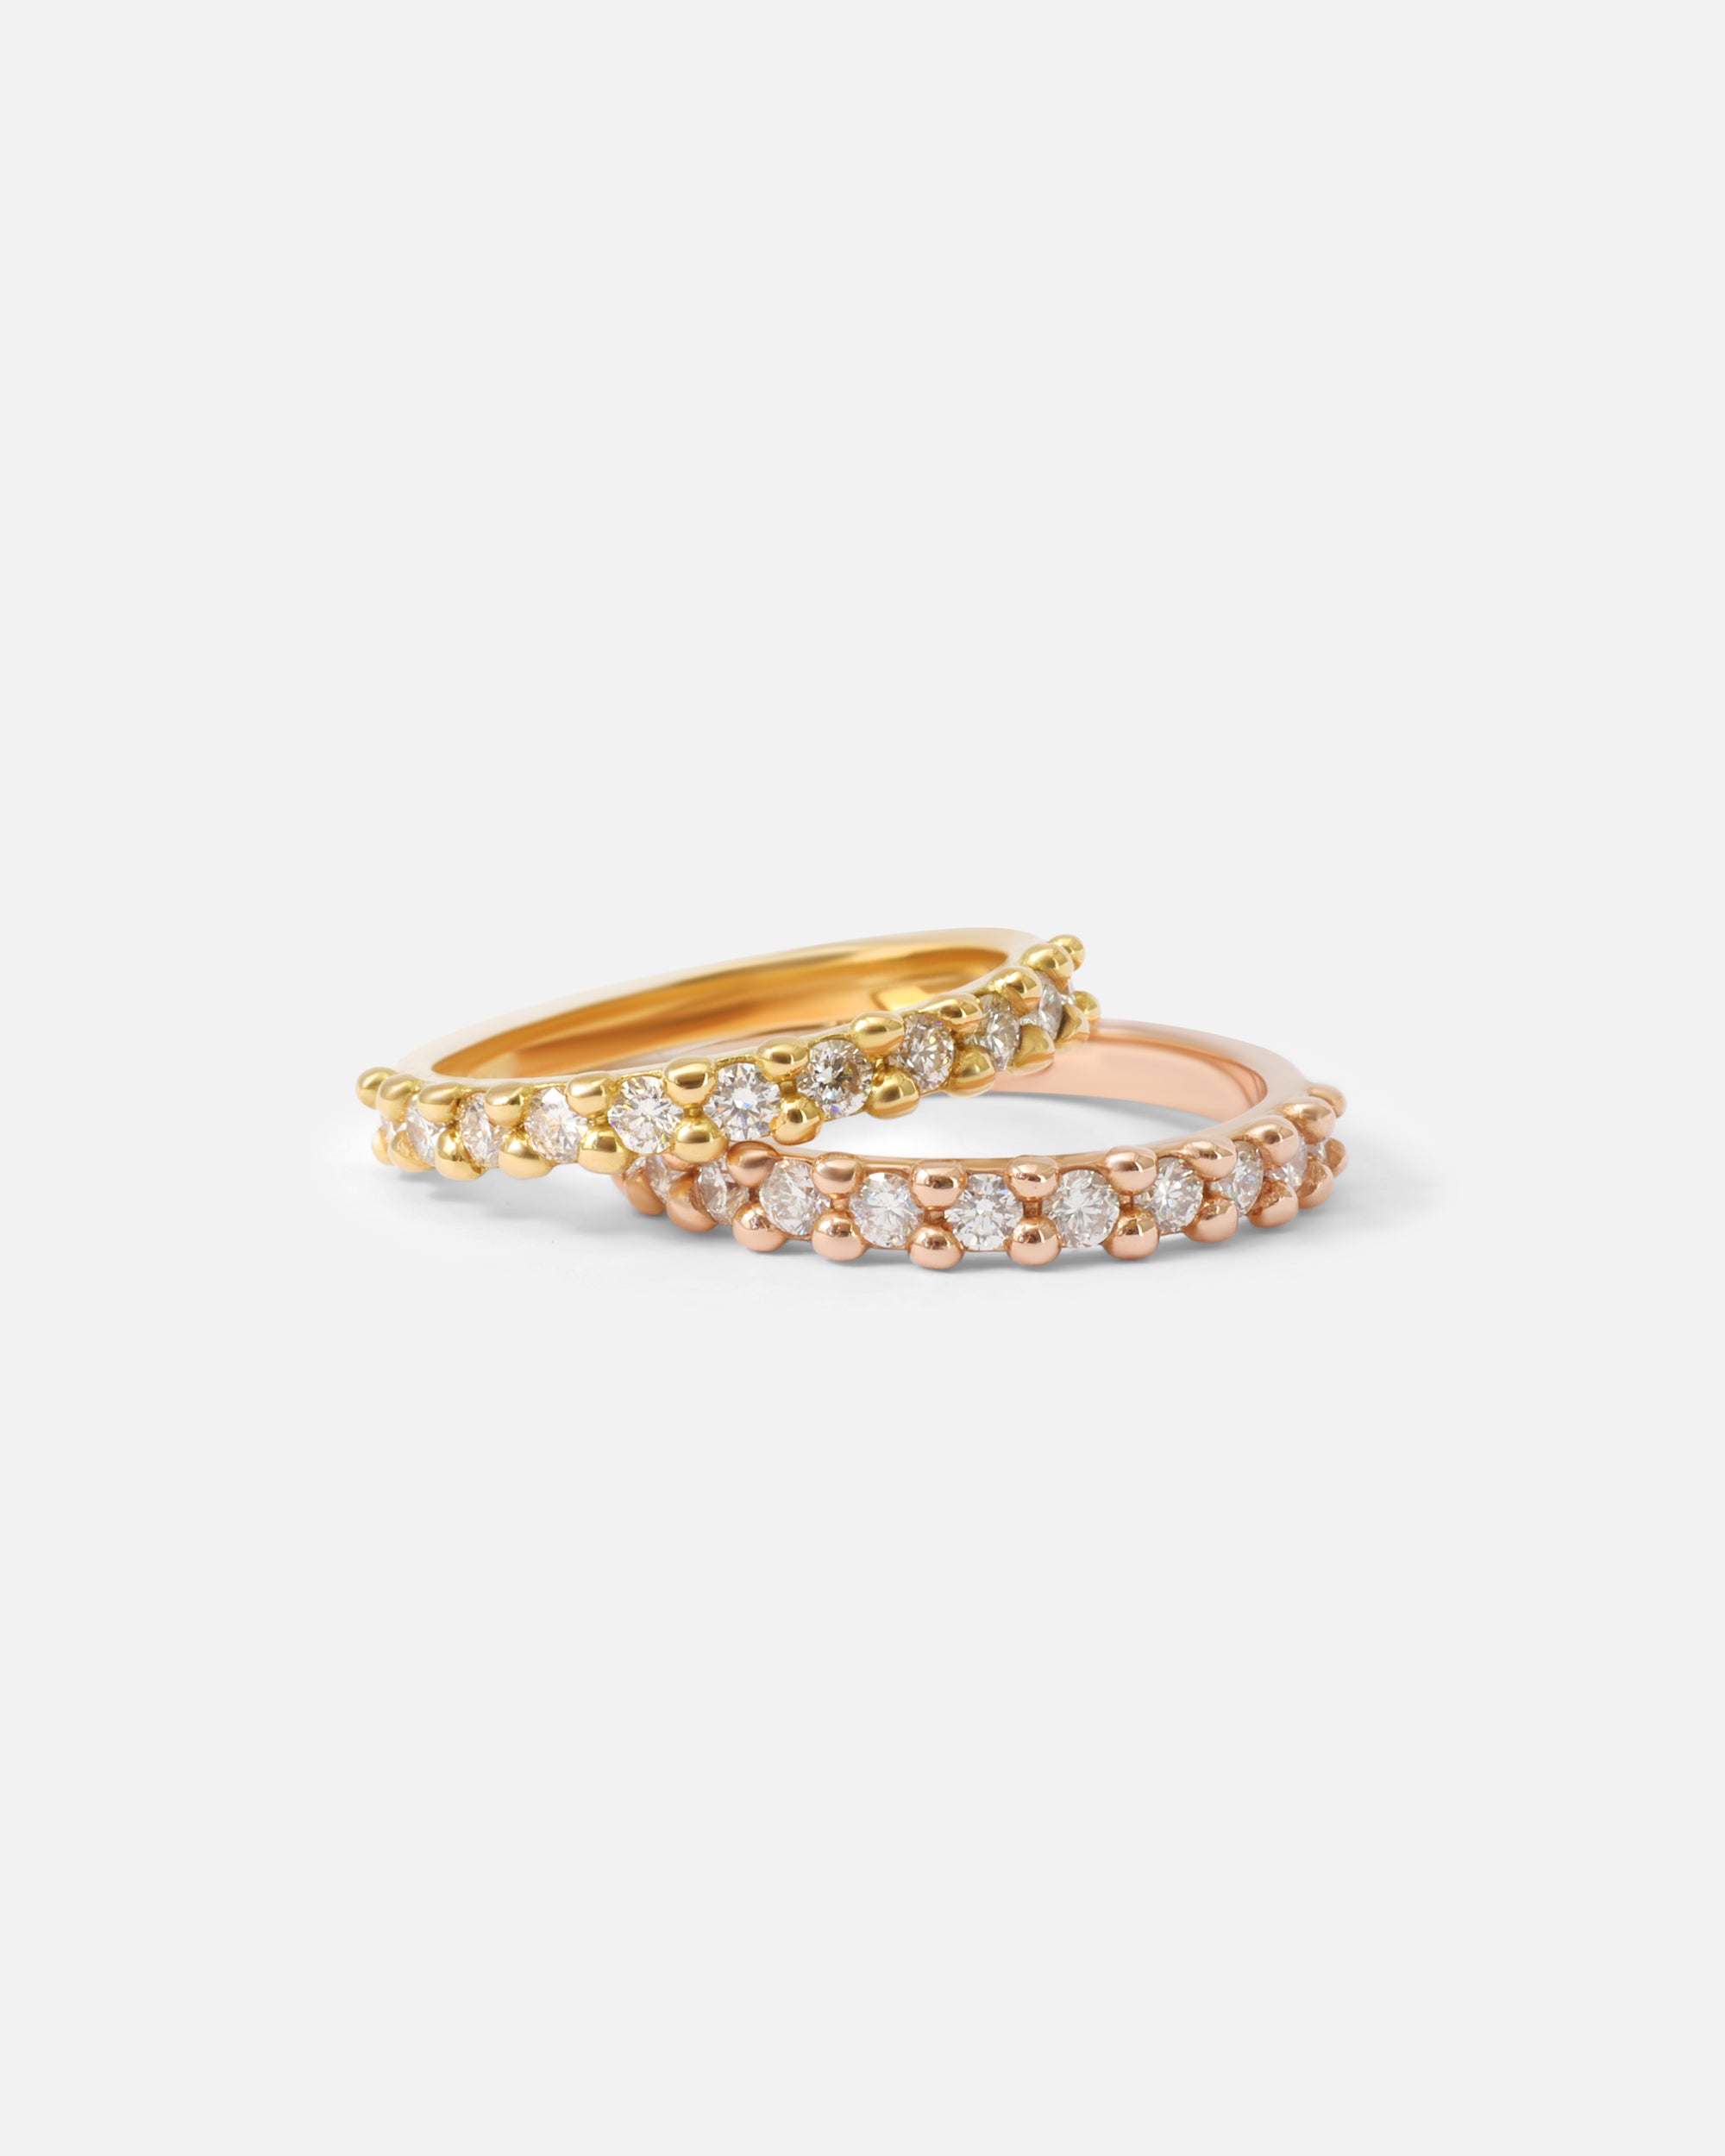 Group view of Dew / 2.3mm Brilliant Cut Diamond Ring in 14k Yellow Gold and 18k Rose Gold